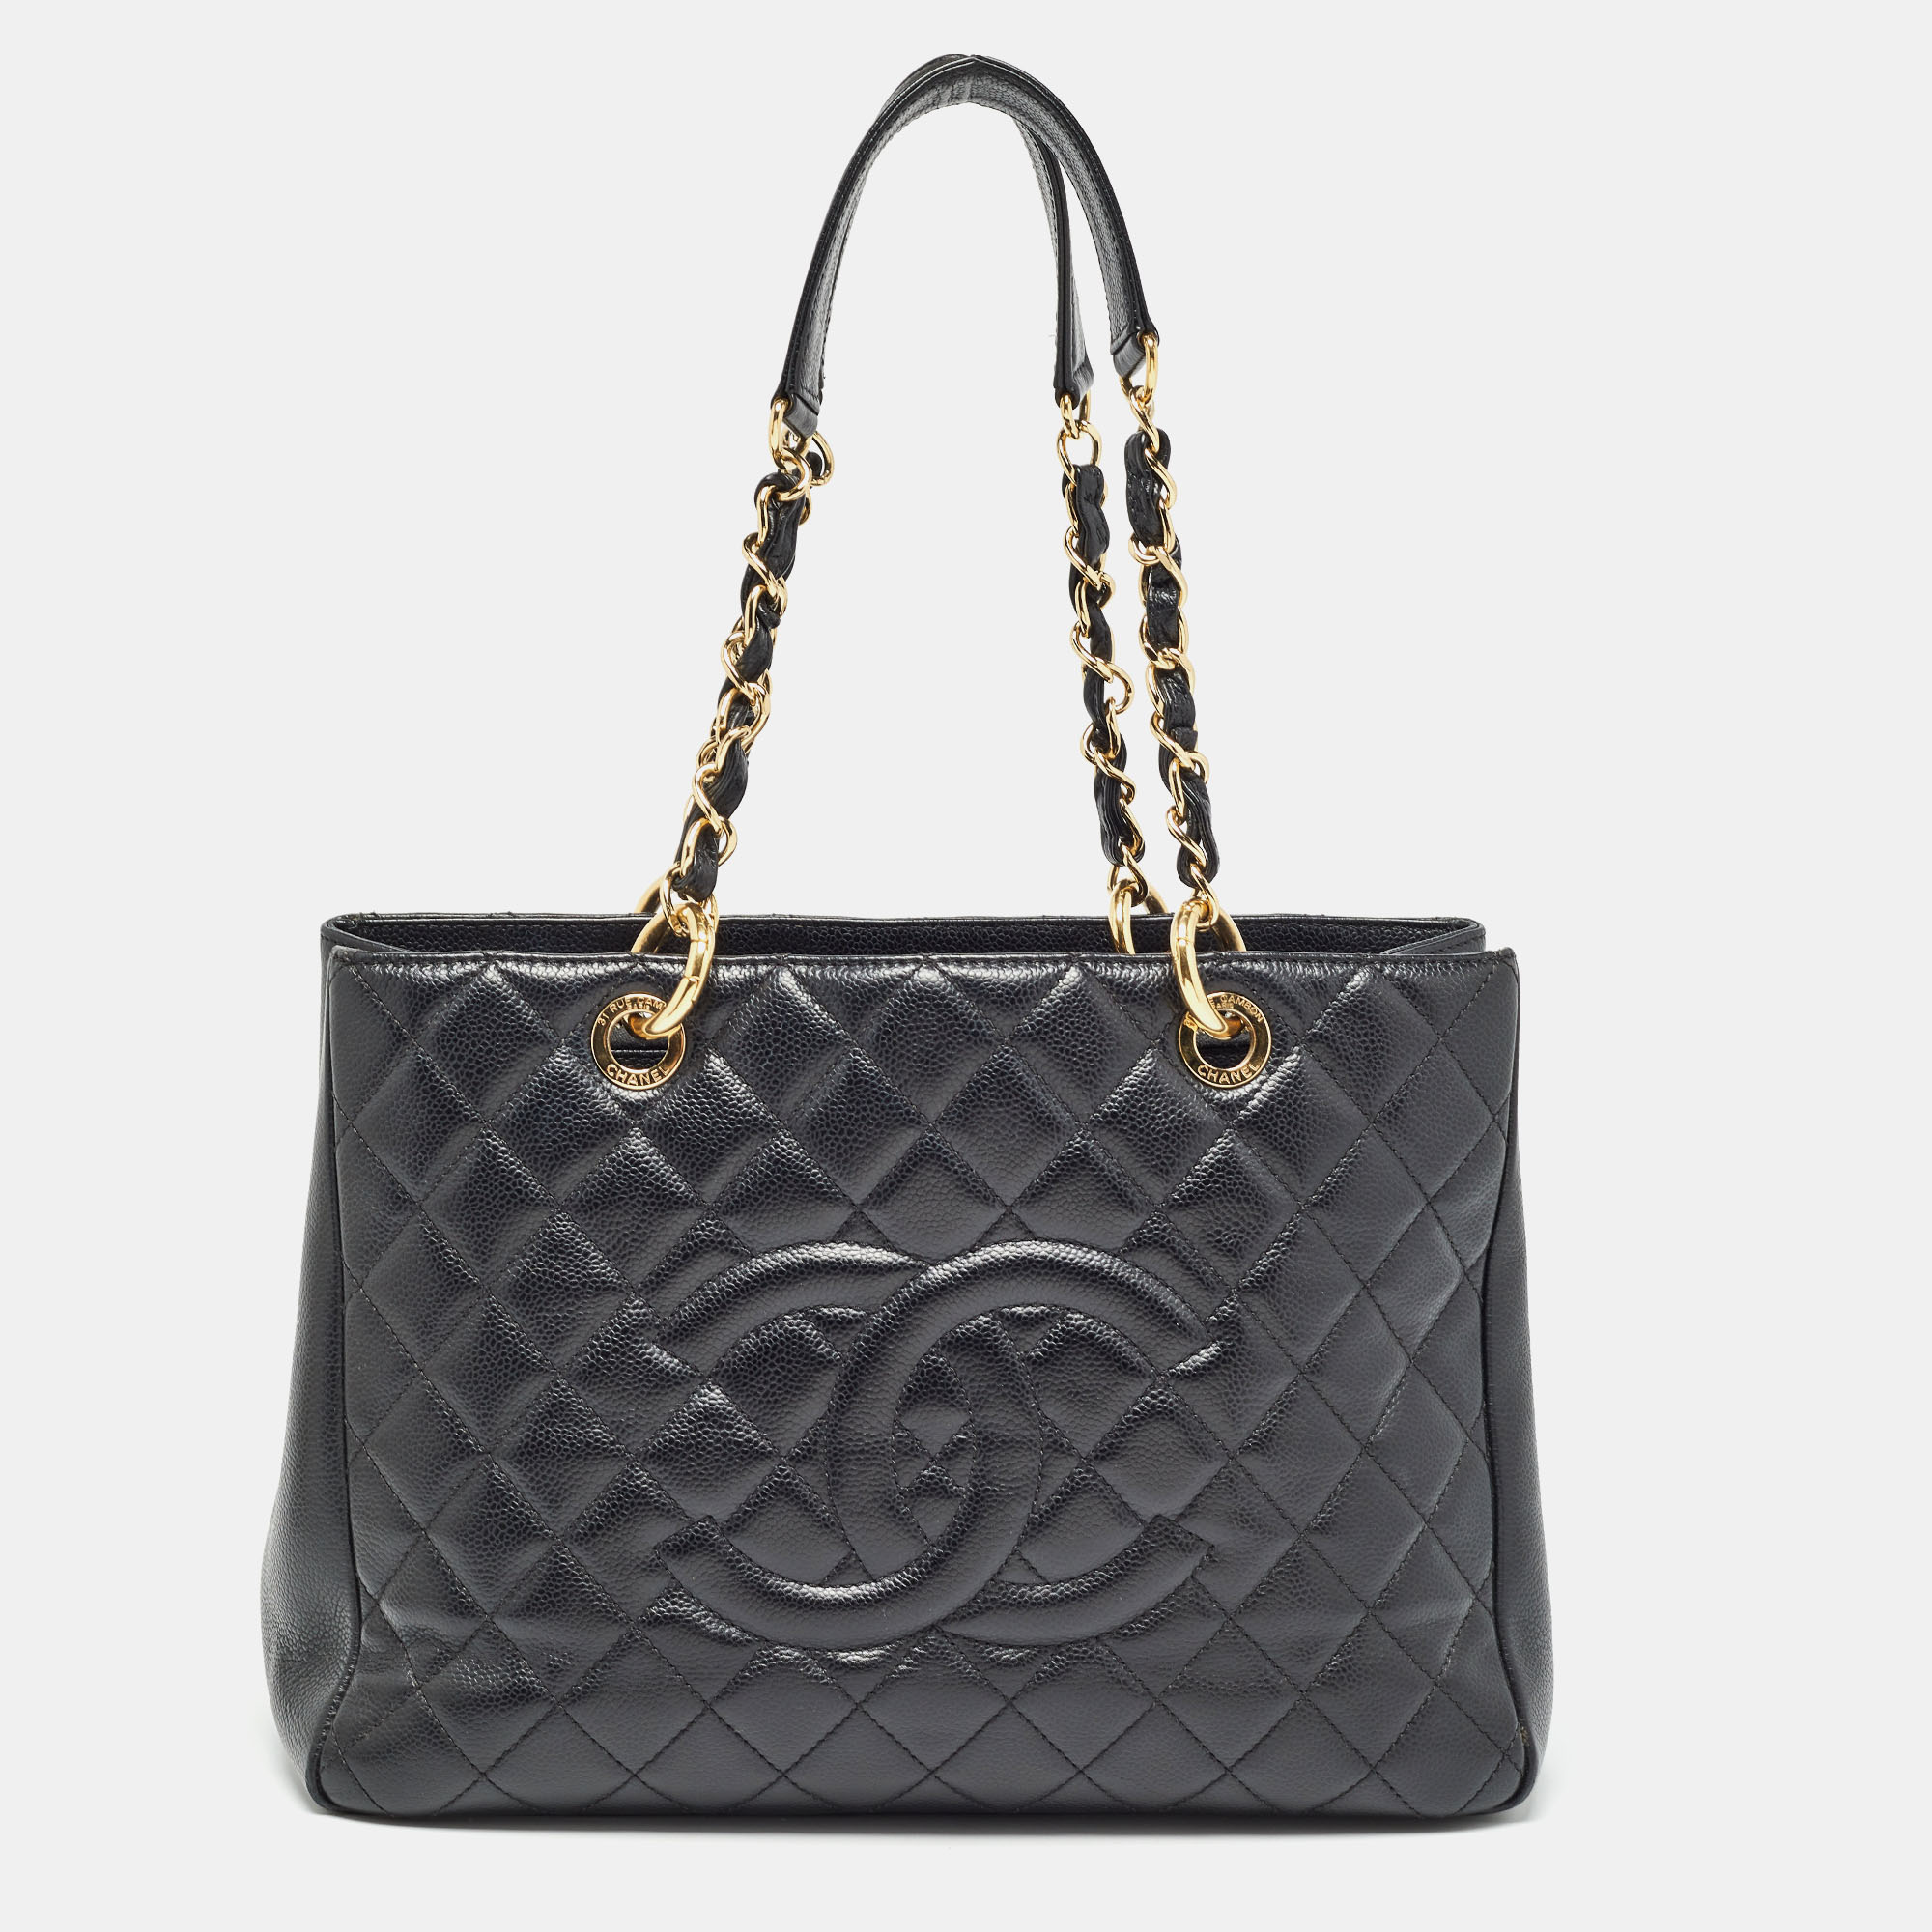 Chanel black quilted caviar leather grand shopping tote